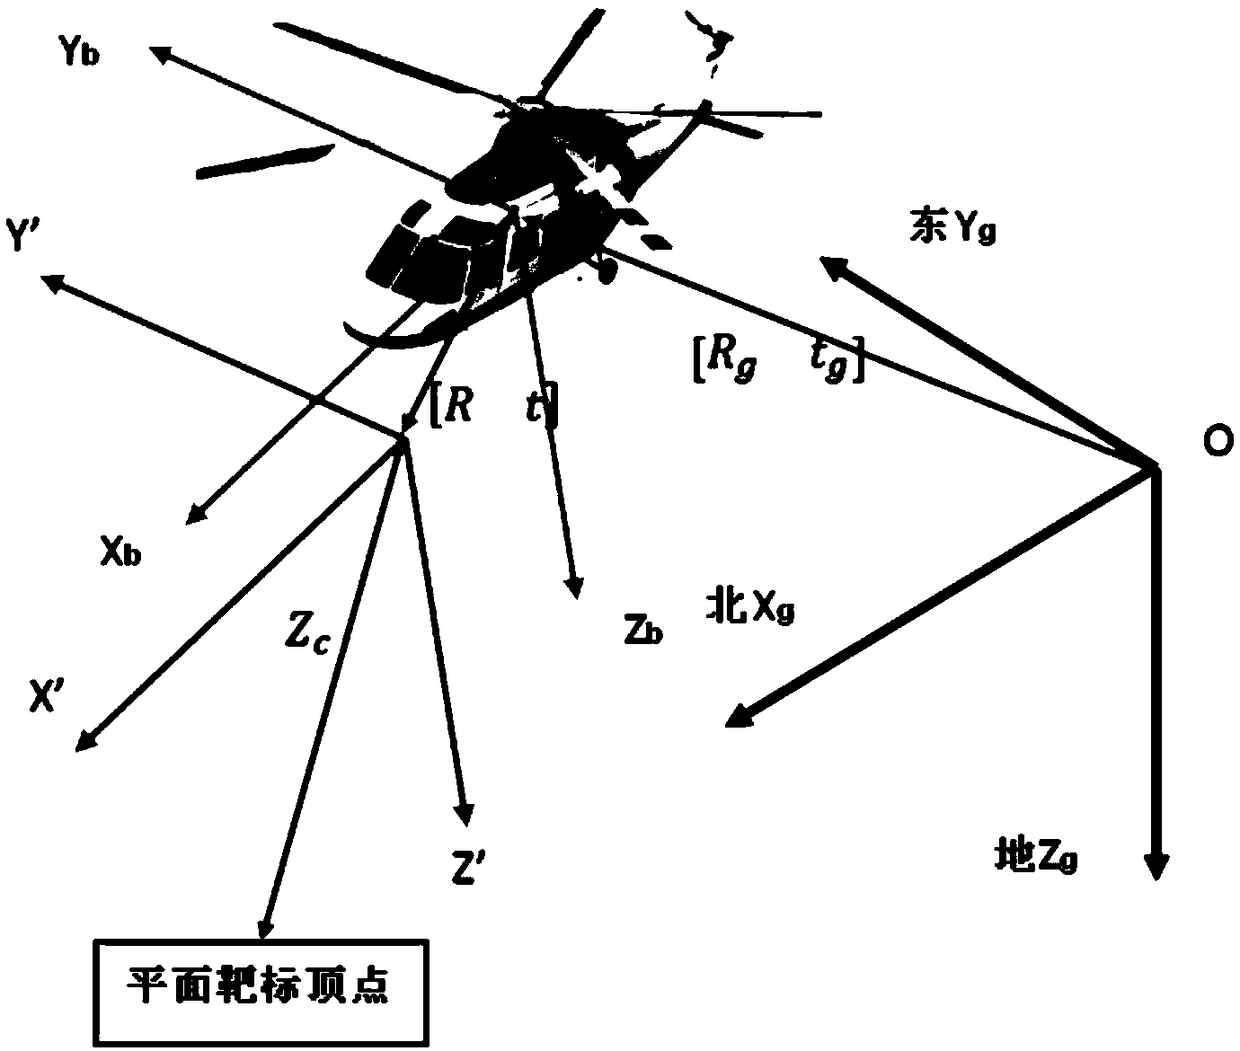 A method for calibrate helicopter airborne binocular stereo vision is disclose